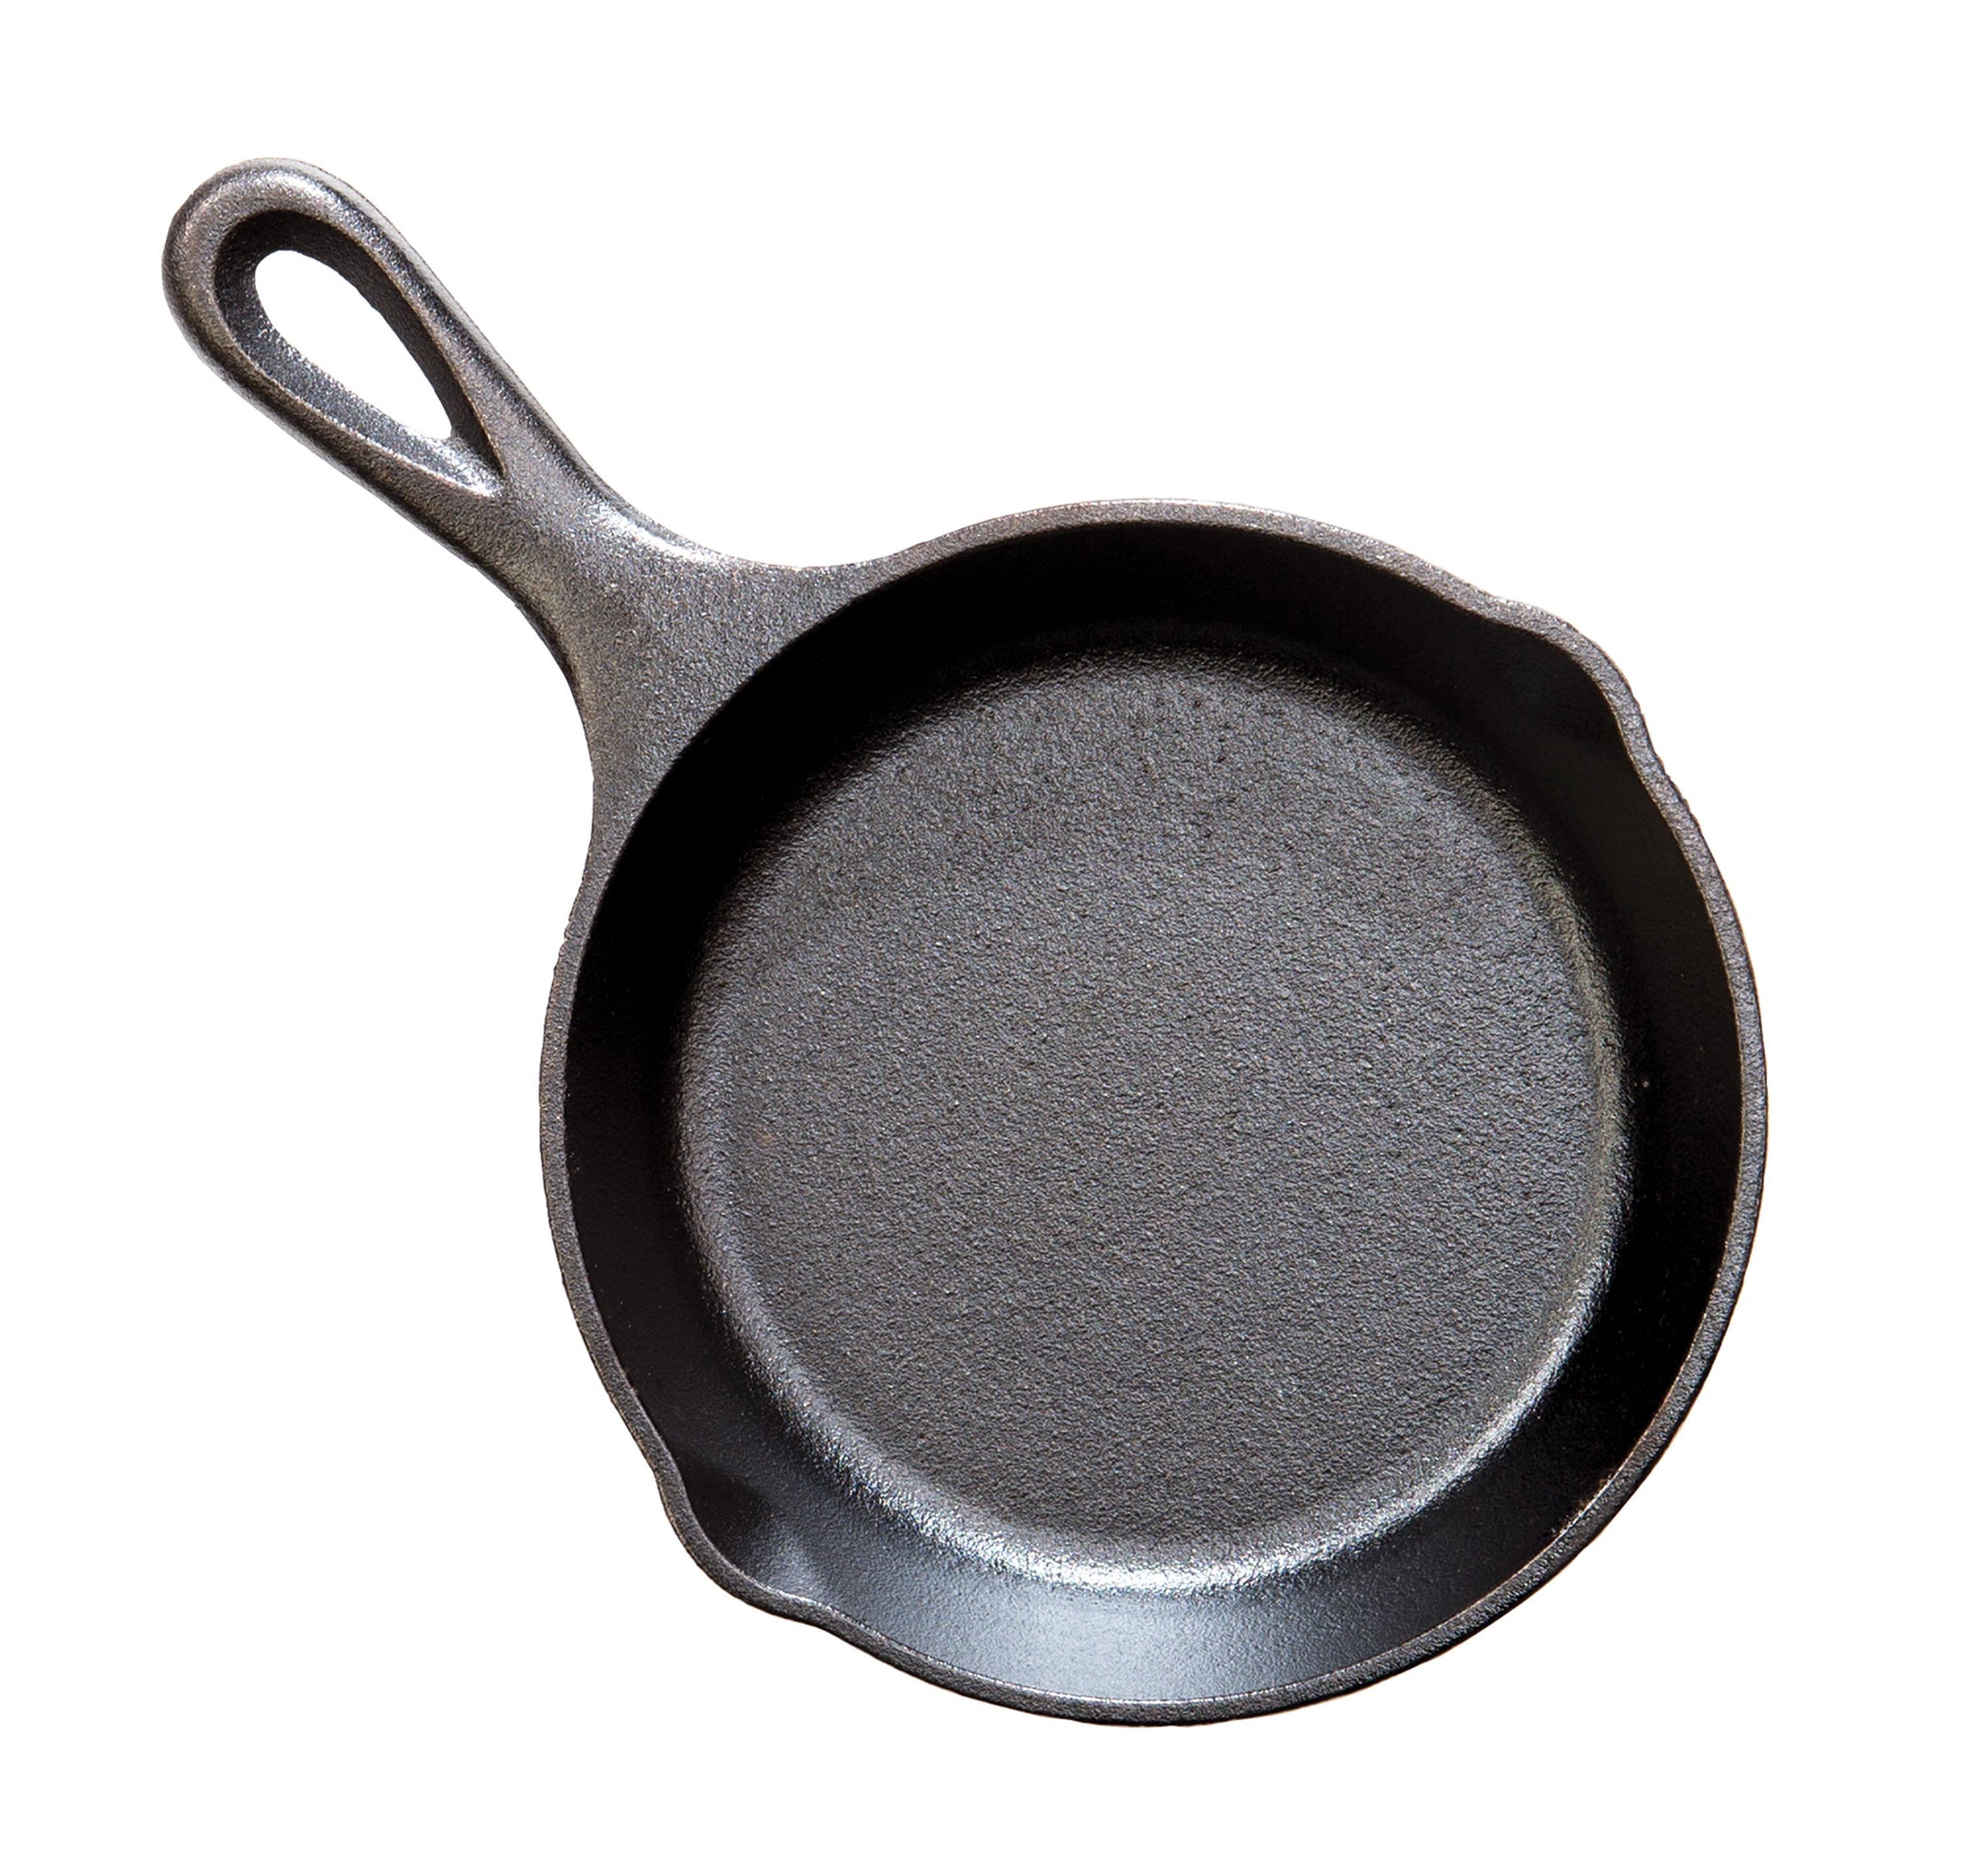  Lodge 10.25 Inch Cast Iron Pre-Seasoned Skillet – Signature  Teardrop Handle - Use in the Oven, on the Stove, on the Grill, or Over a  Campfire, Black: Cast Iron Skillet: Home